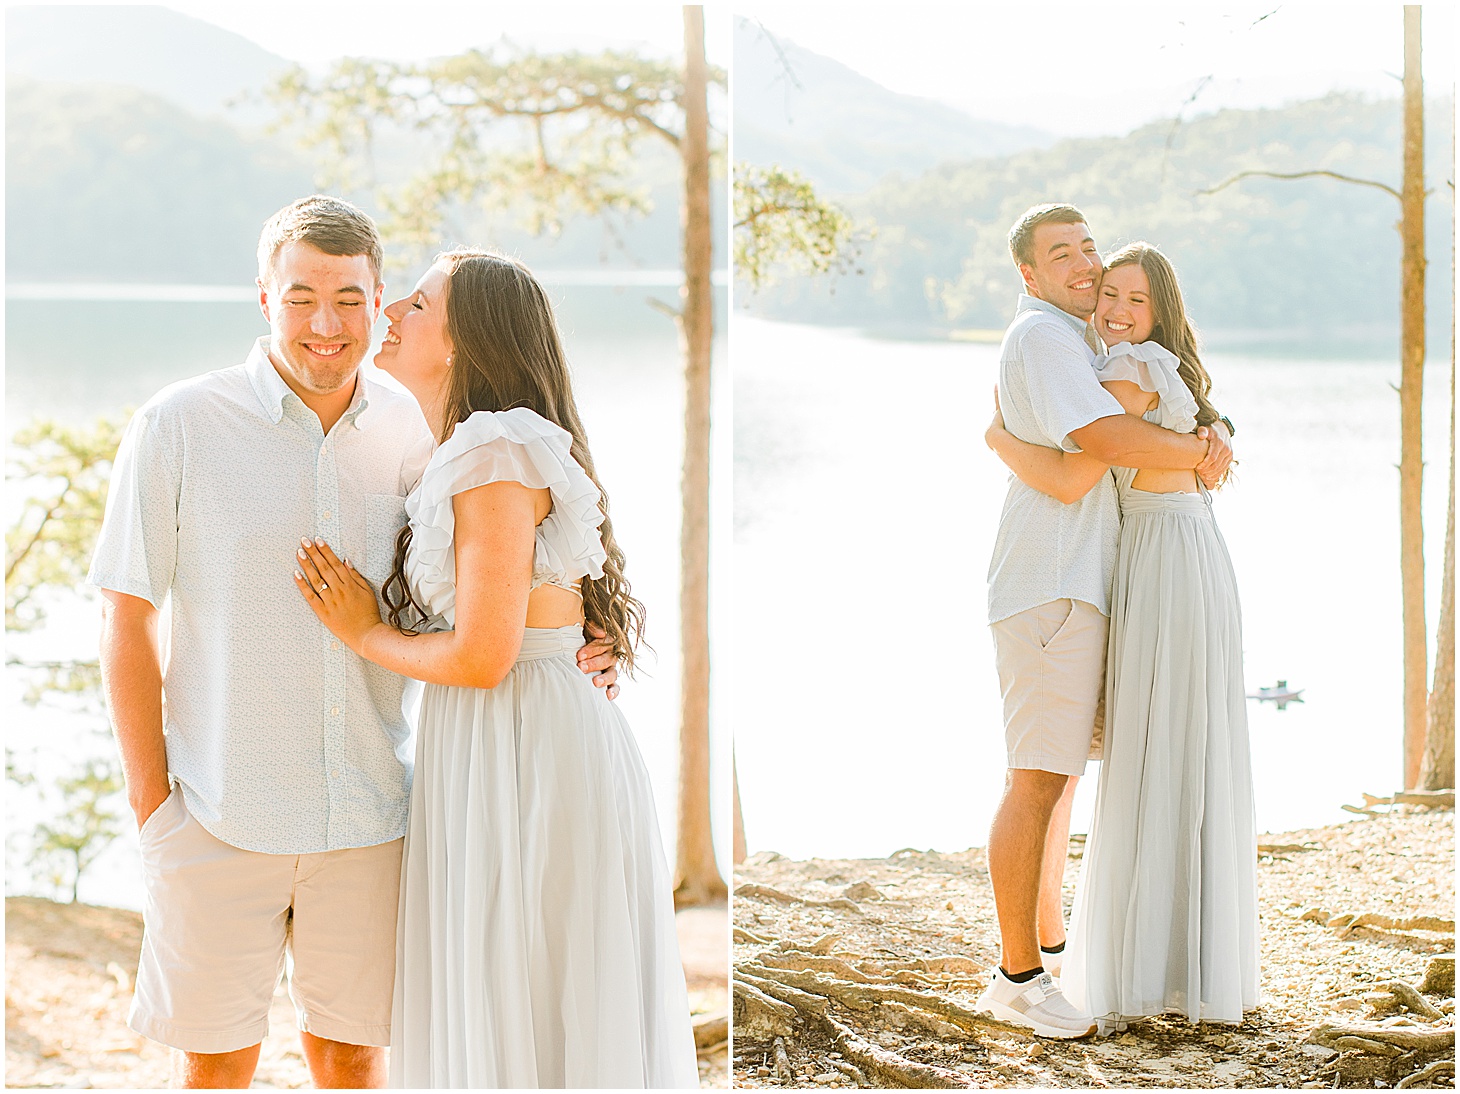 carvinscove_roanokeengagementsession_virginiaweddingphotographer_vaweddingphotographer_photo_0072.jpg